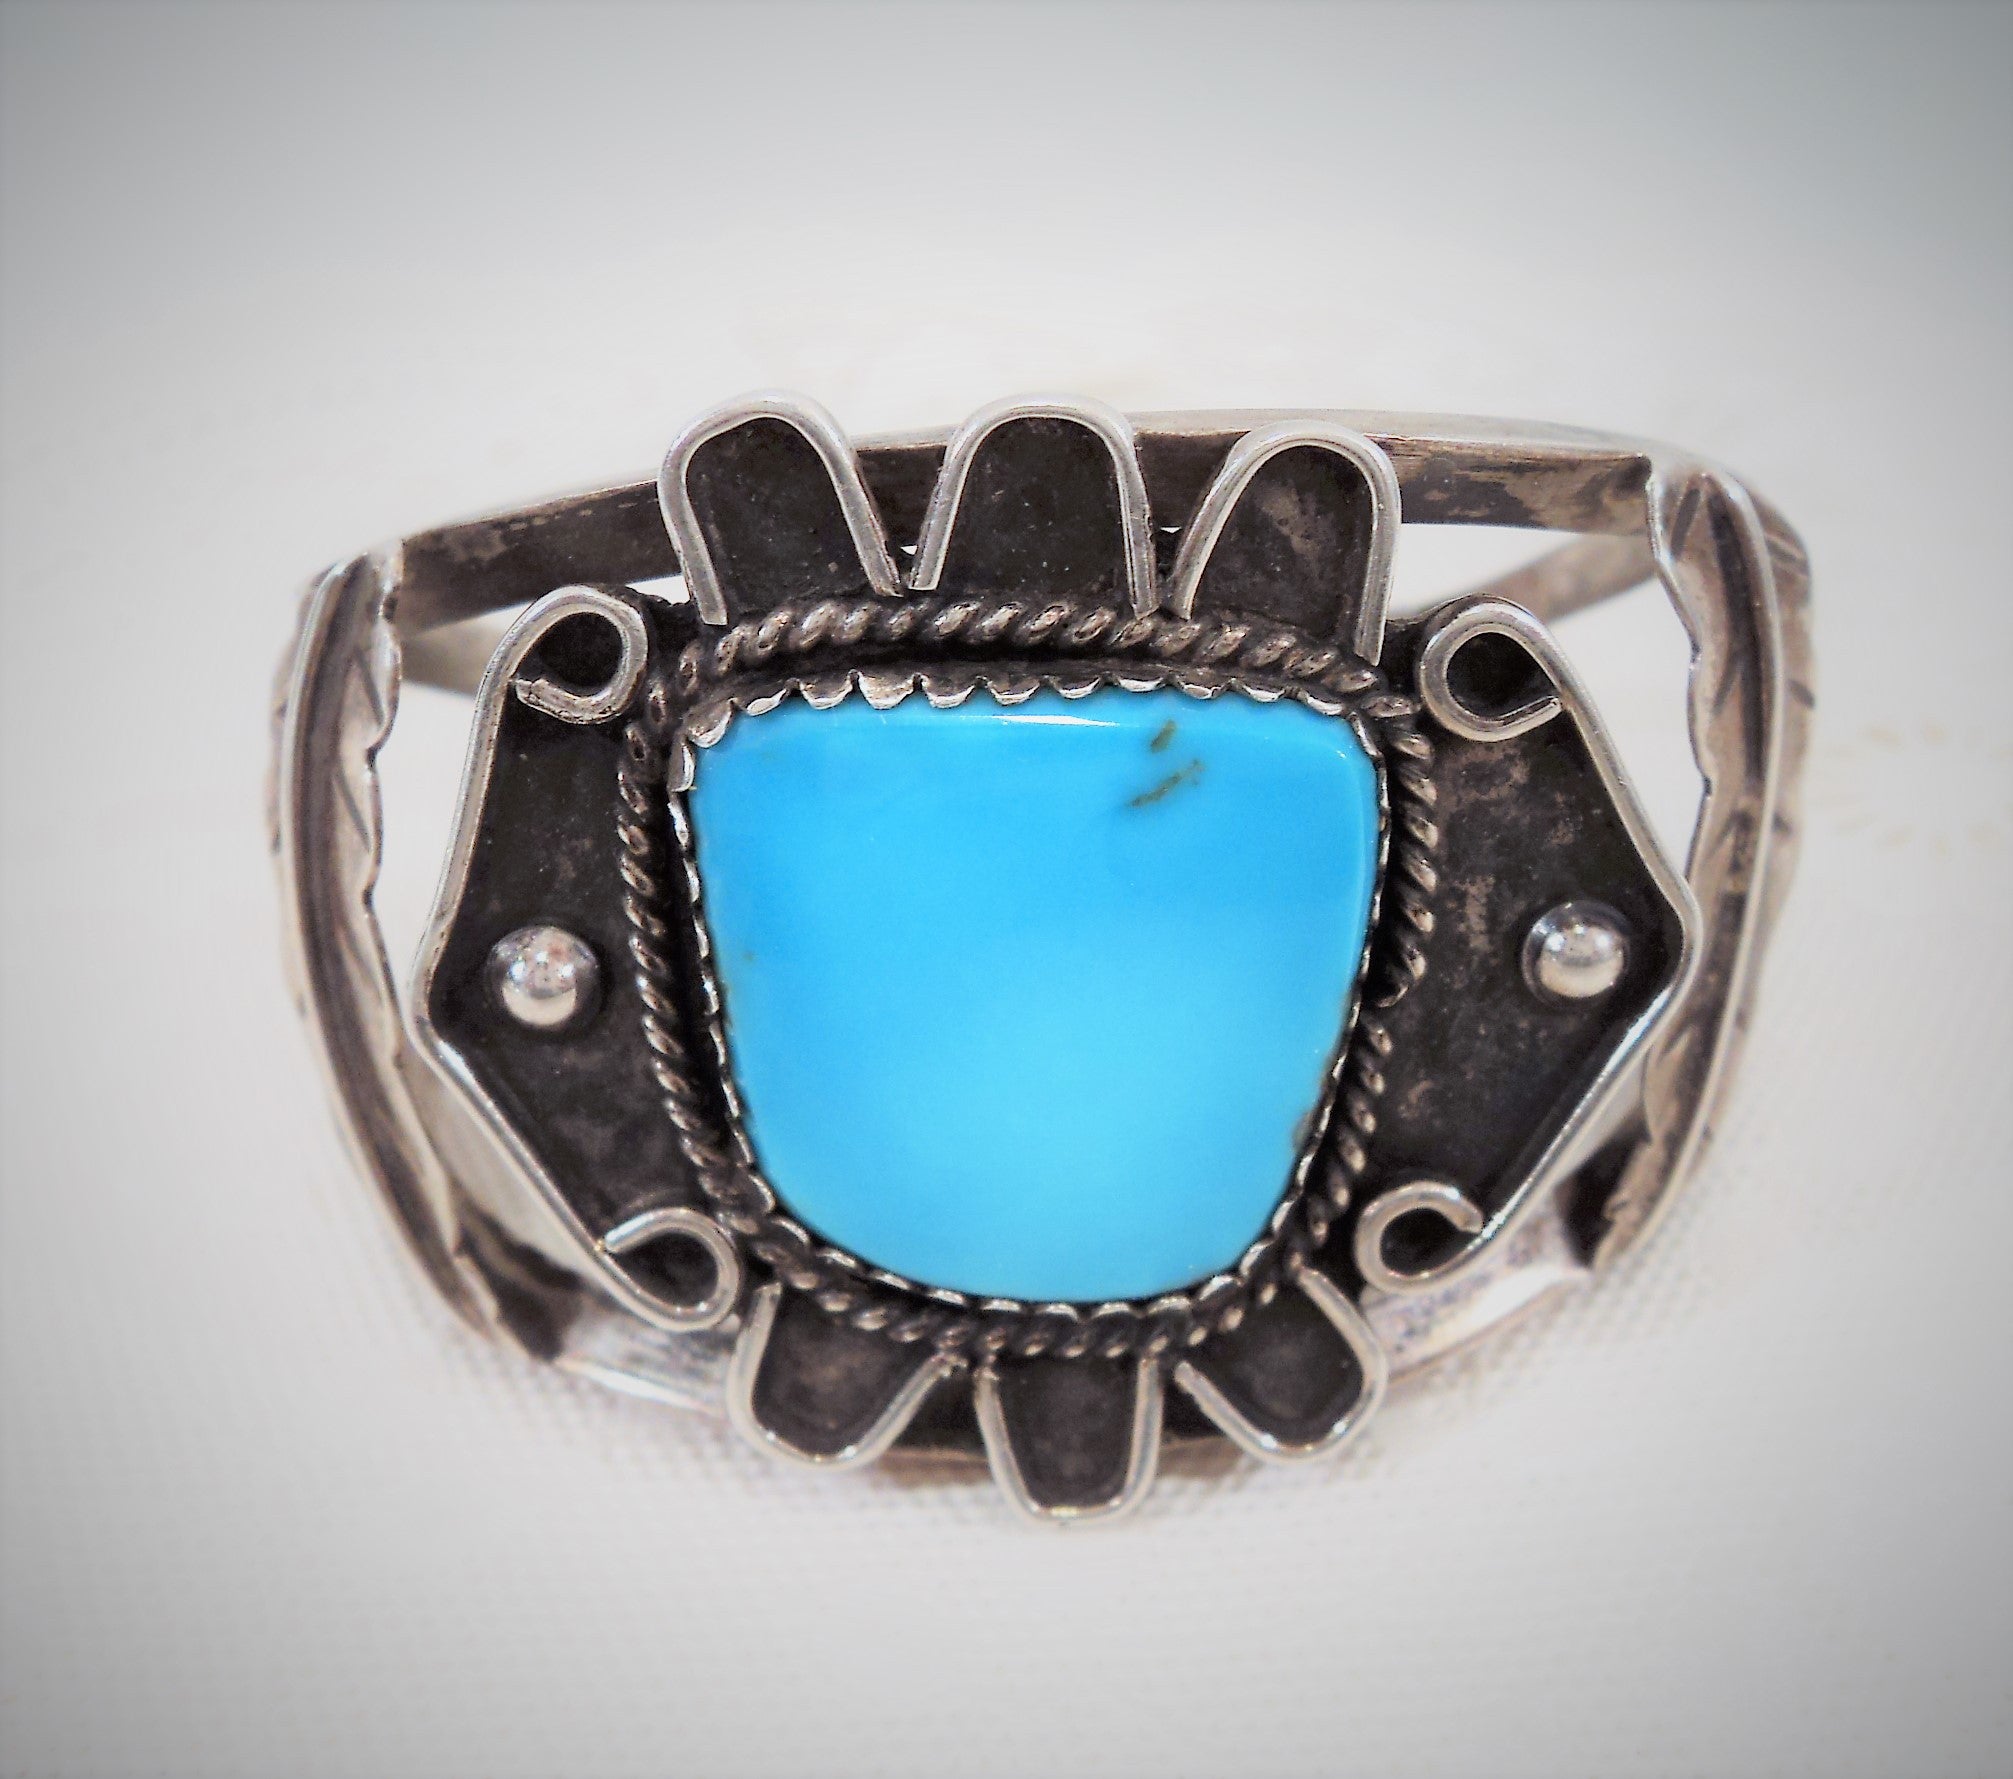 Vinage Native American Turquoise & Silver Cuff Bracelet